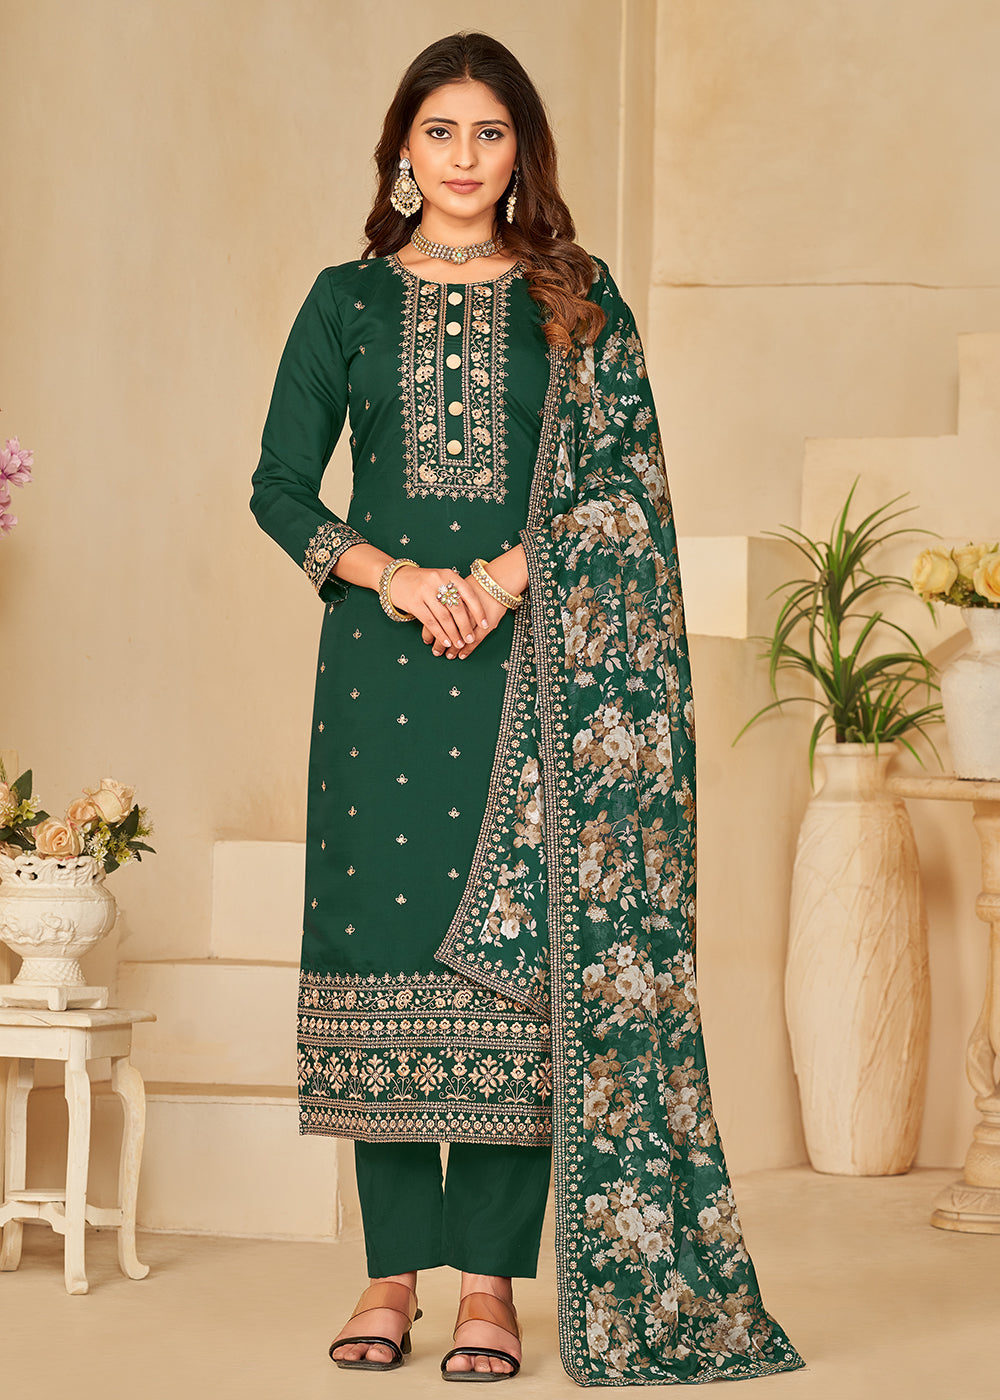 Buy Now Pant Style Green Silk Embroidered Ethnic Salwar Kameez Online in USA, UK, Canada, Germany, Australia & Worldwide at Empress Clothing. 